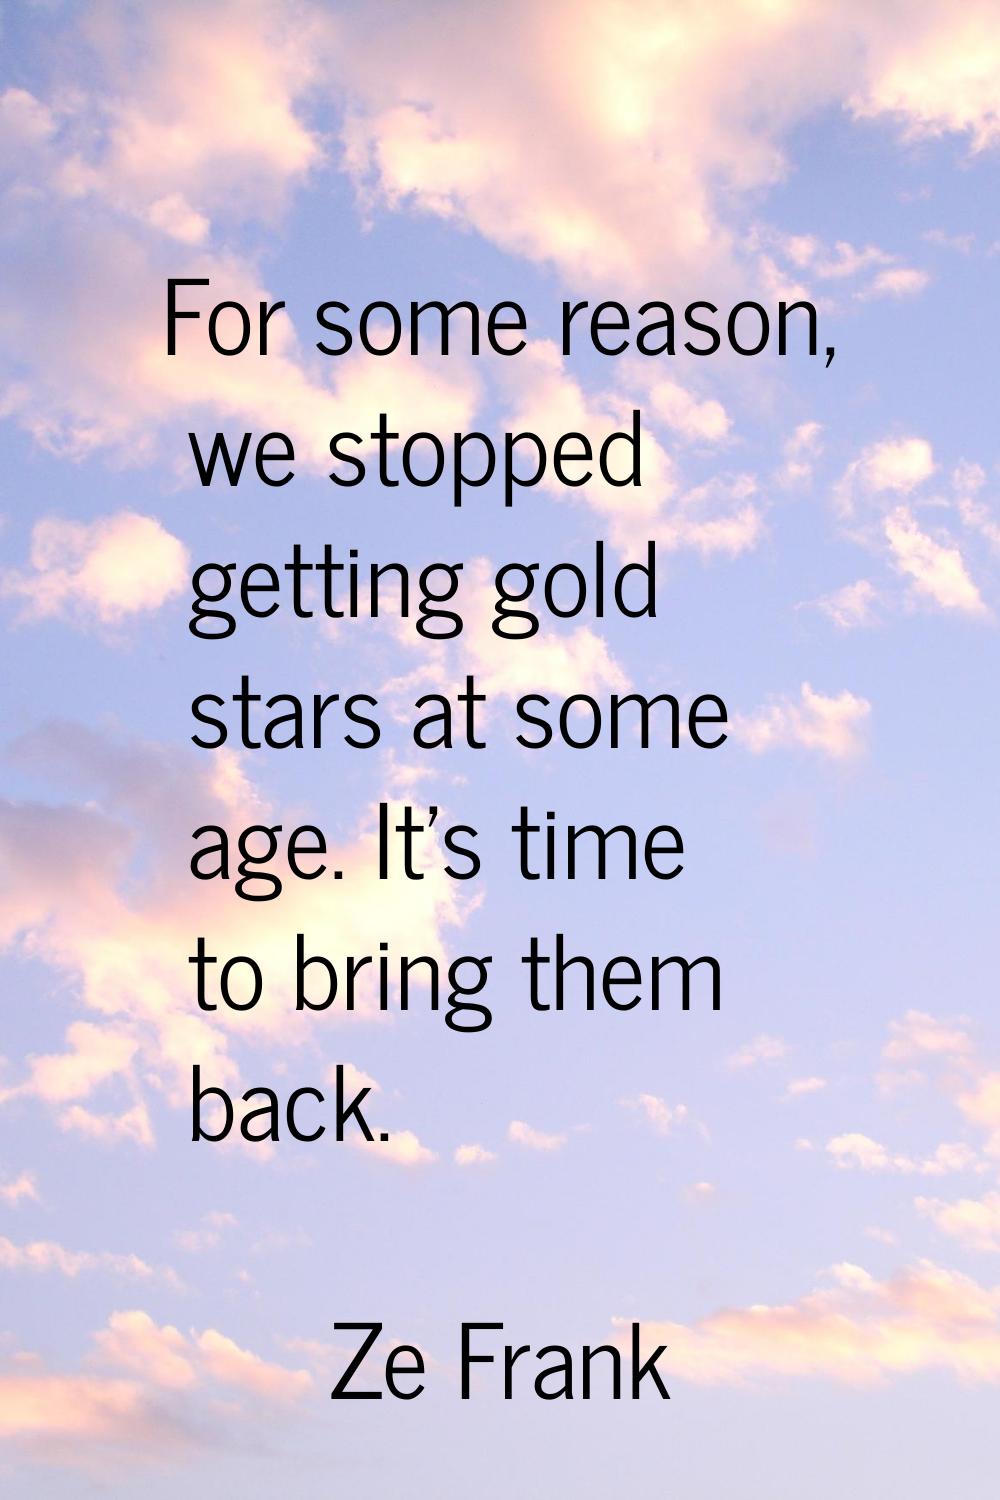 For some reason, we stopped getting gold stars at some age. It's time to bring them back.